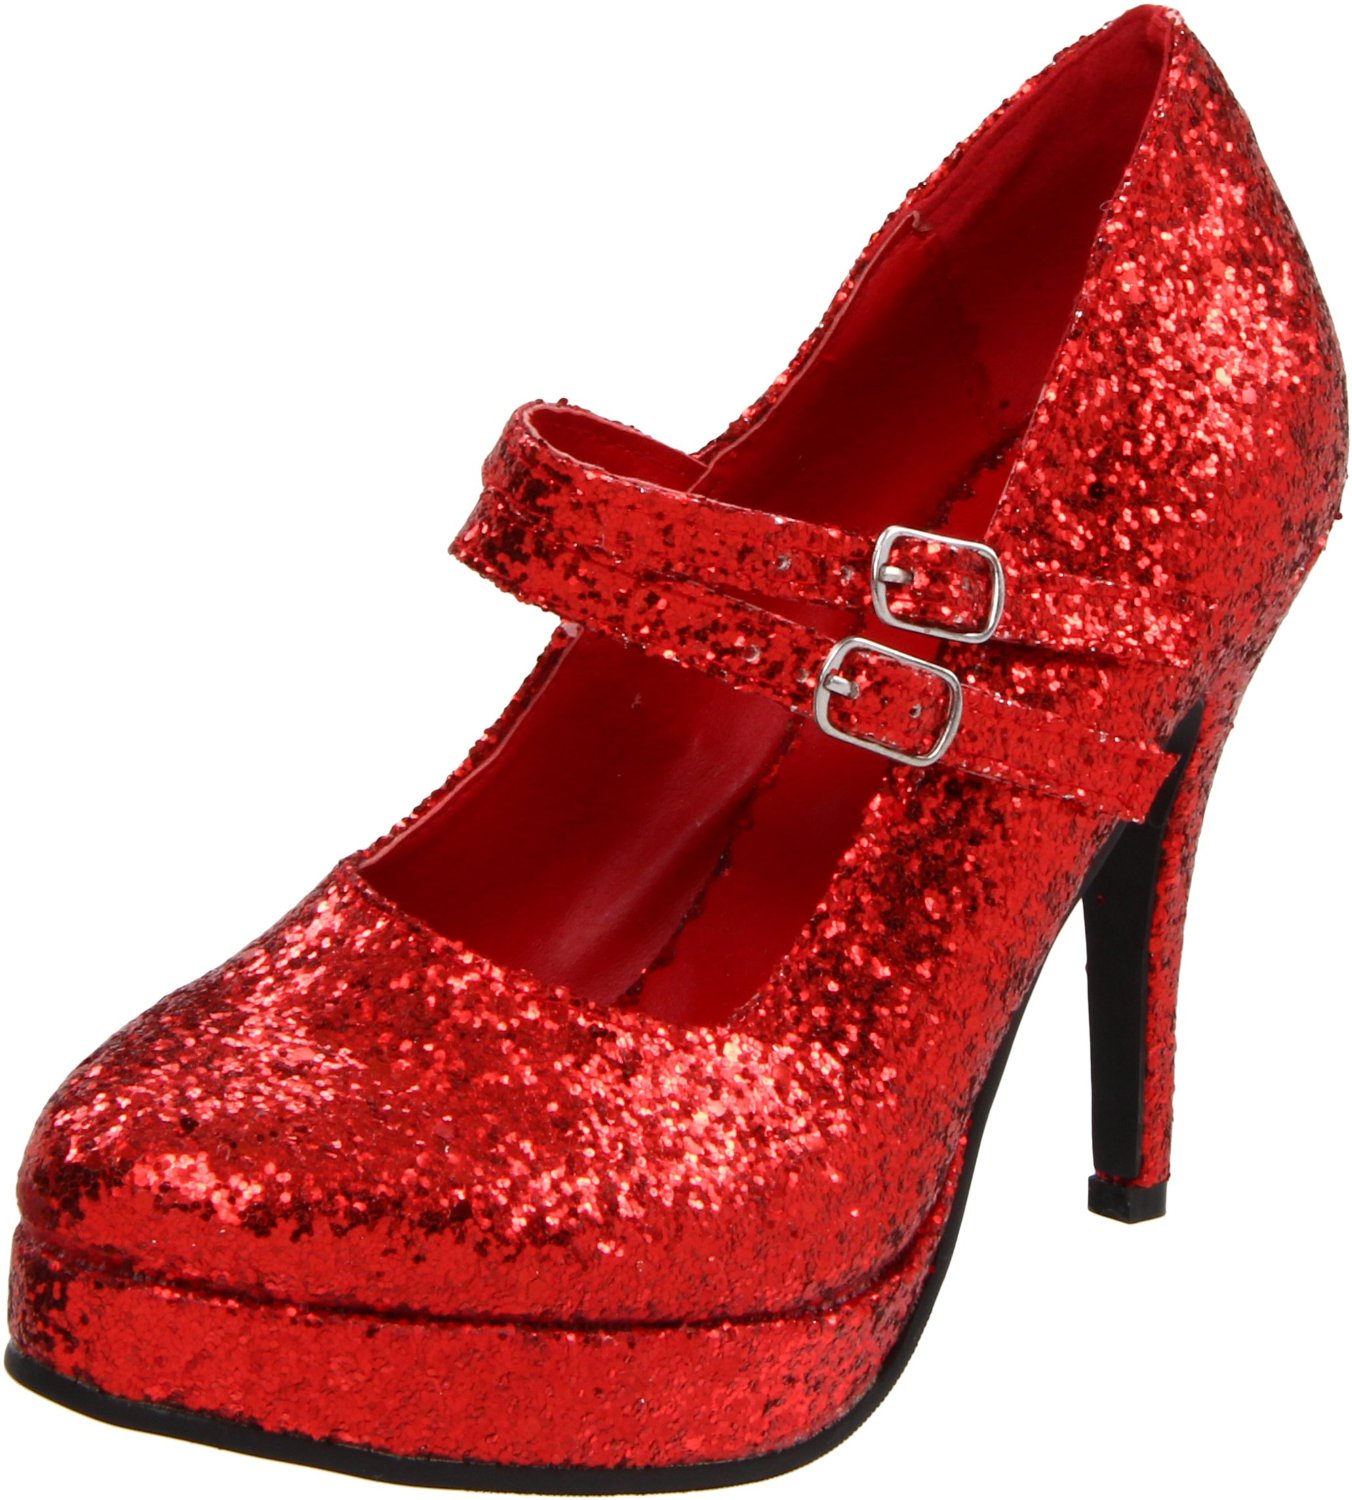 Fashion trends: Red glitter shoes - High heel prom shoes